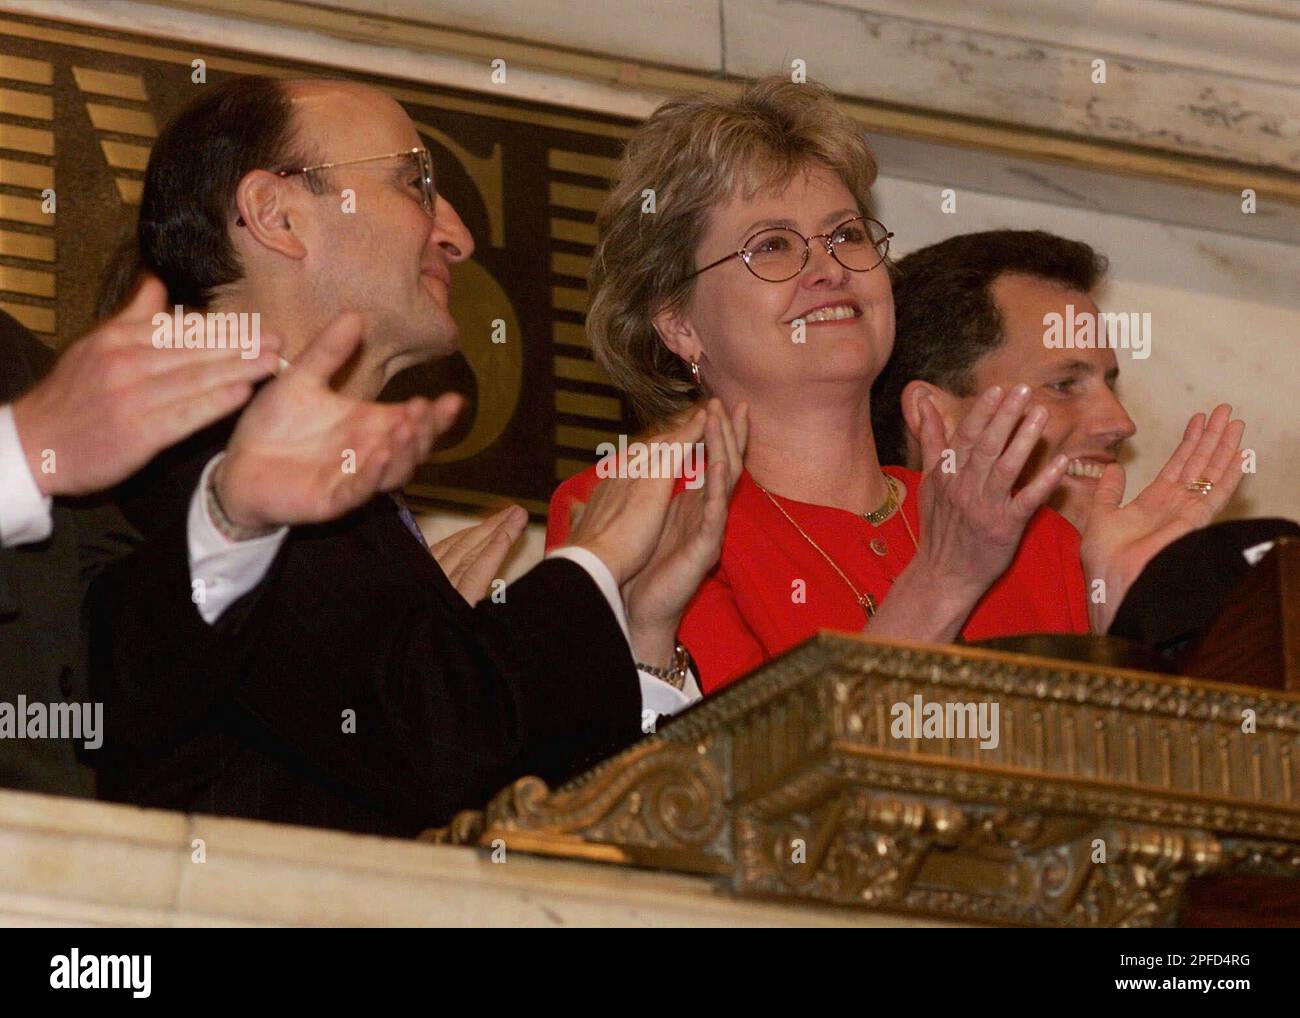 Katherine Hudson, president and CEO of Brady Corp., is joined in applause by New York Stock Excahnge Chairman Richard Grasso, left, after she rang the opening bell during listing ceremonies, Tuesday, May 18, 1999. The company, based in Milwaukee, Wis., manufactures identification systems, tapes and components for adhesion. They do business in 18 countries and operate 16 manufacturing facilities worldwide. (AP Photo/Richard Drew) Stockfoto